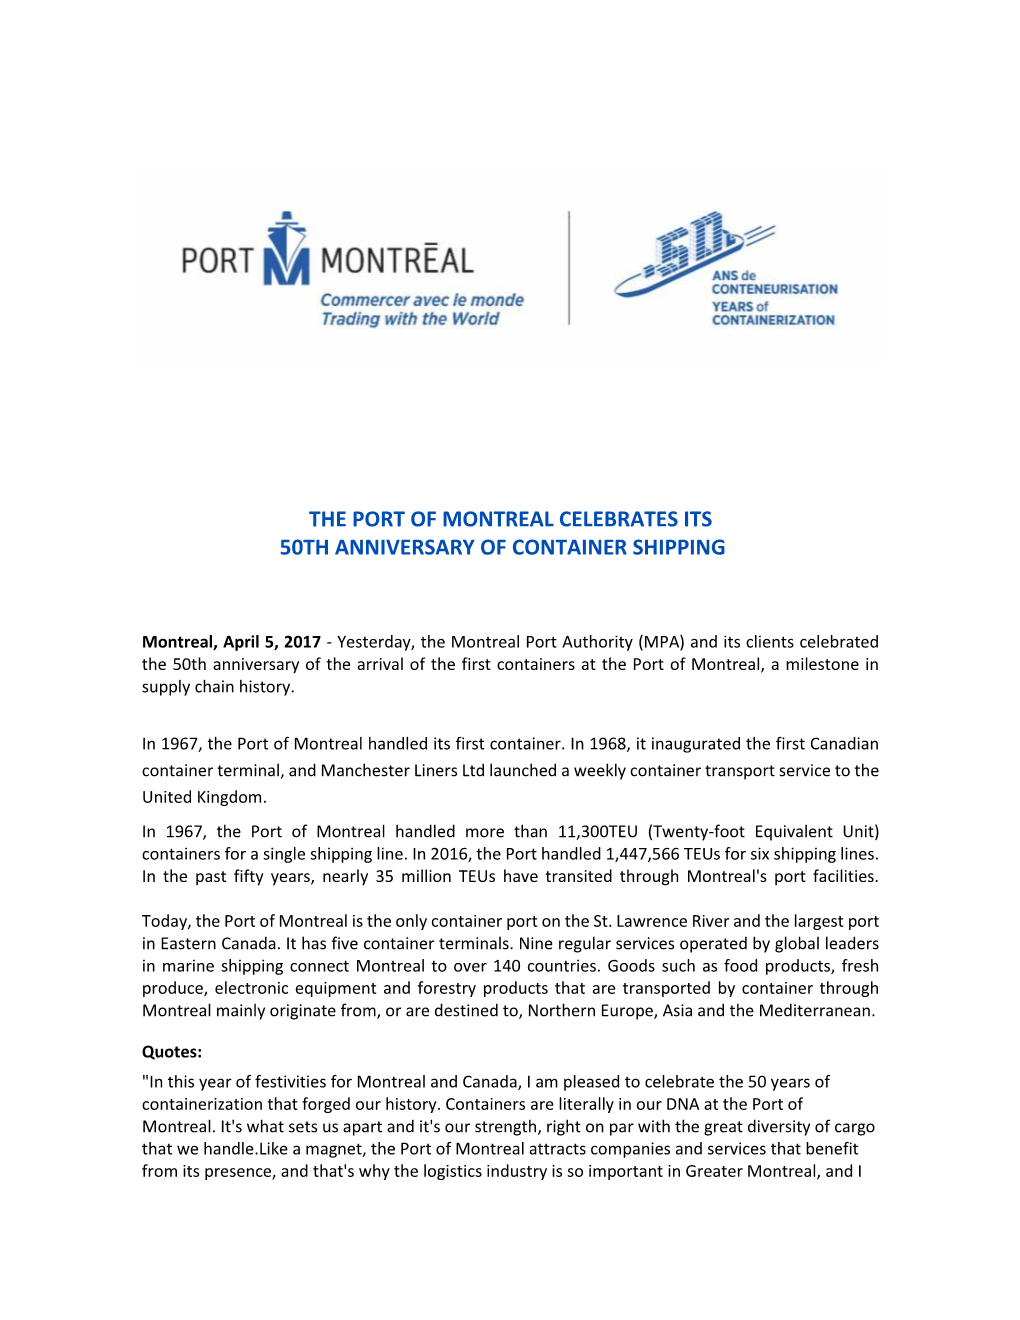 The Port of Montreal Celebrates Its 50Th Anniversary of Container Shipping